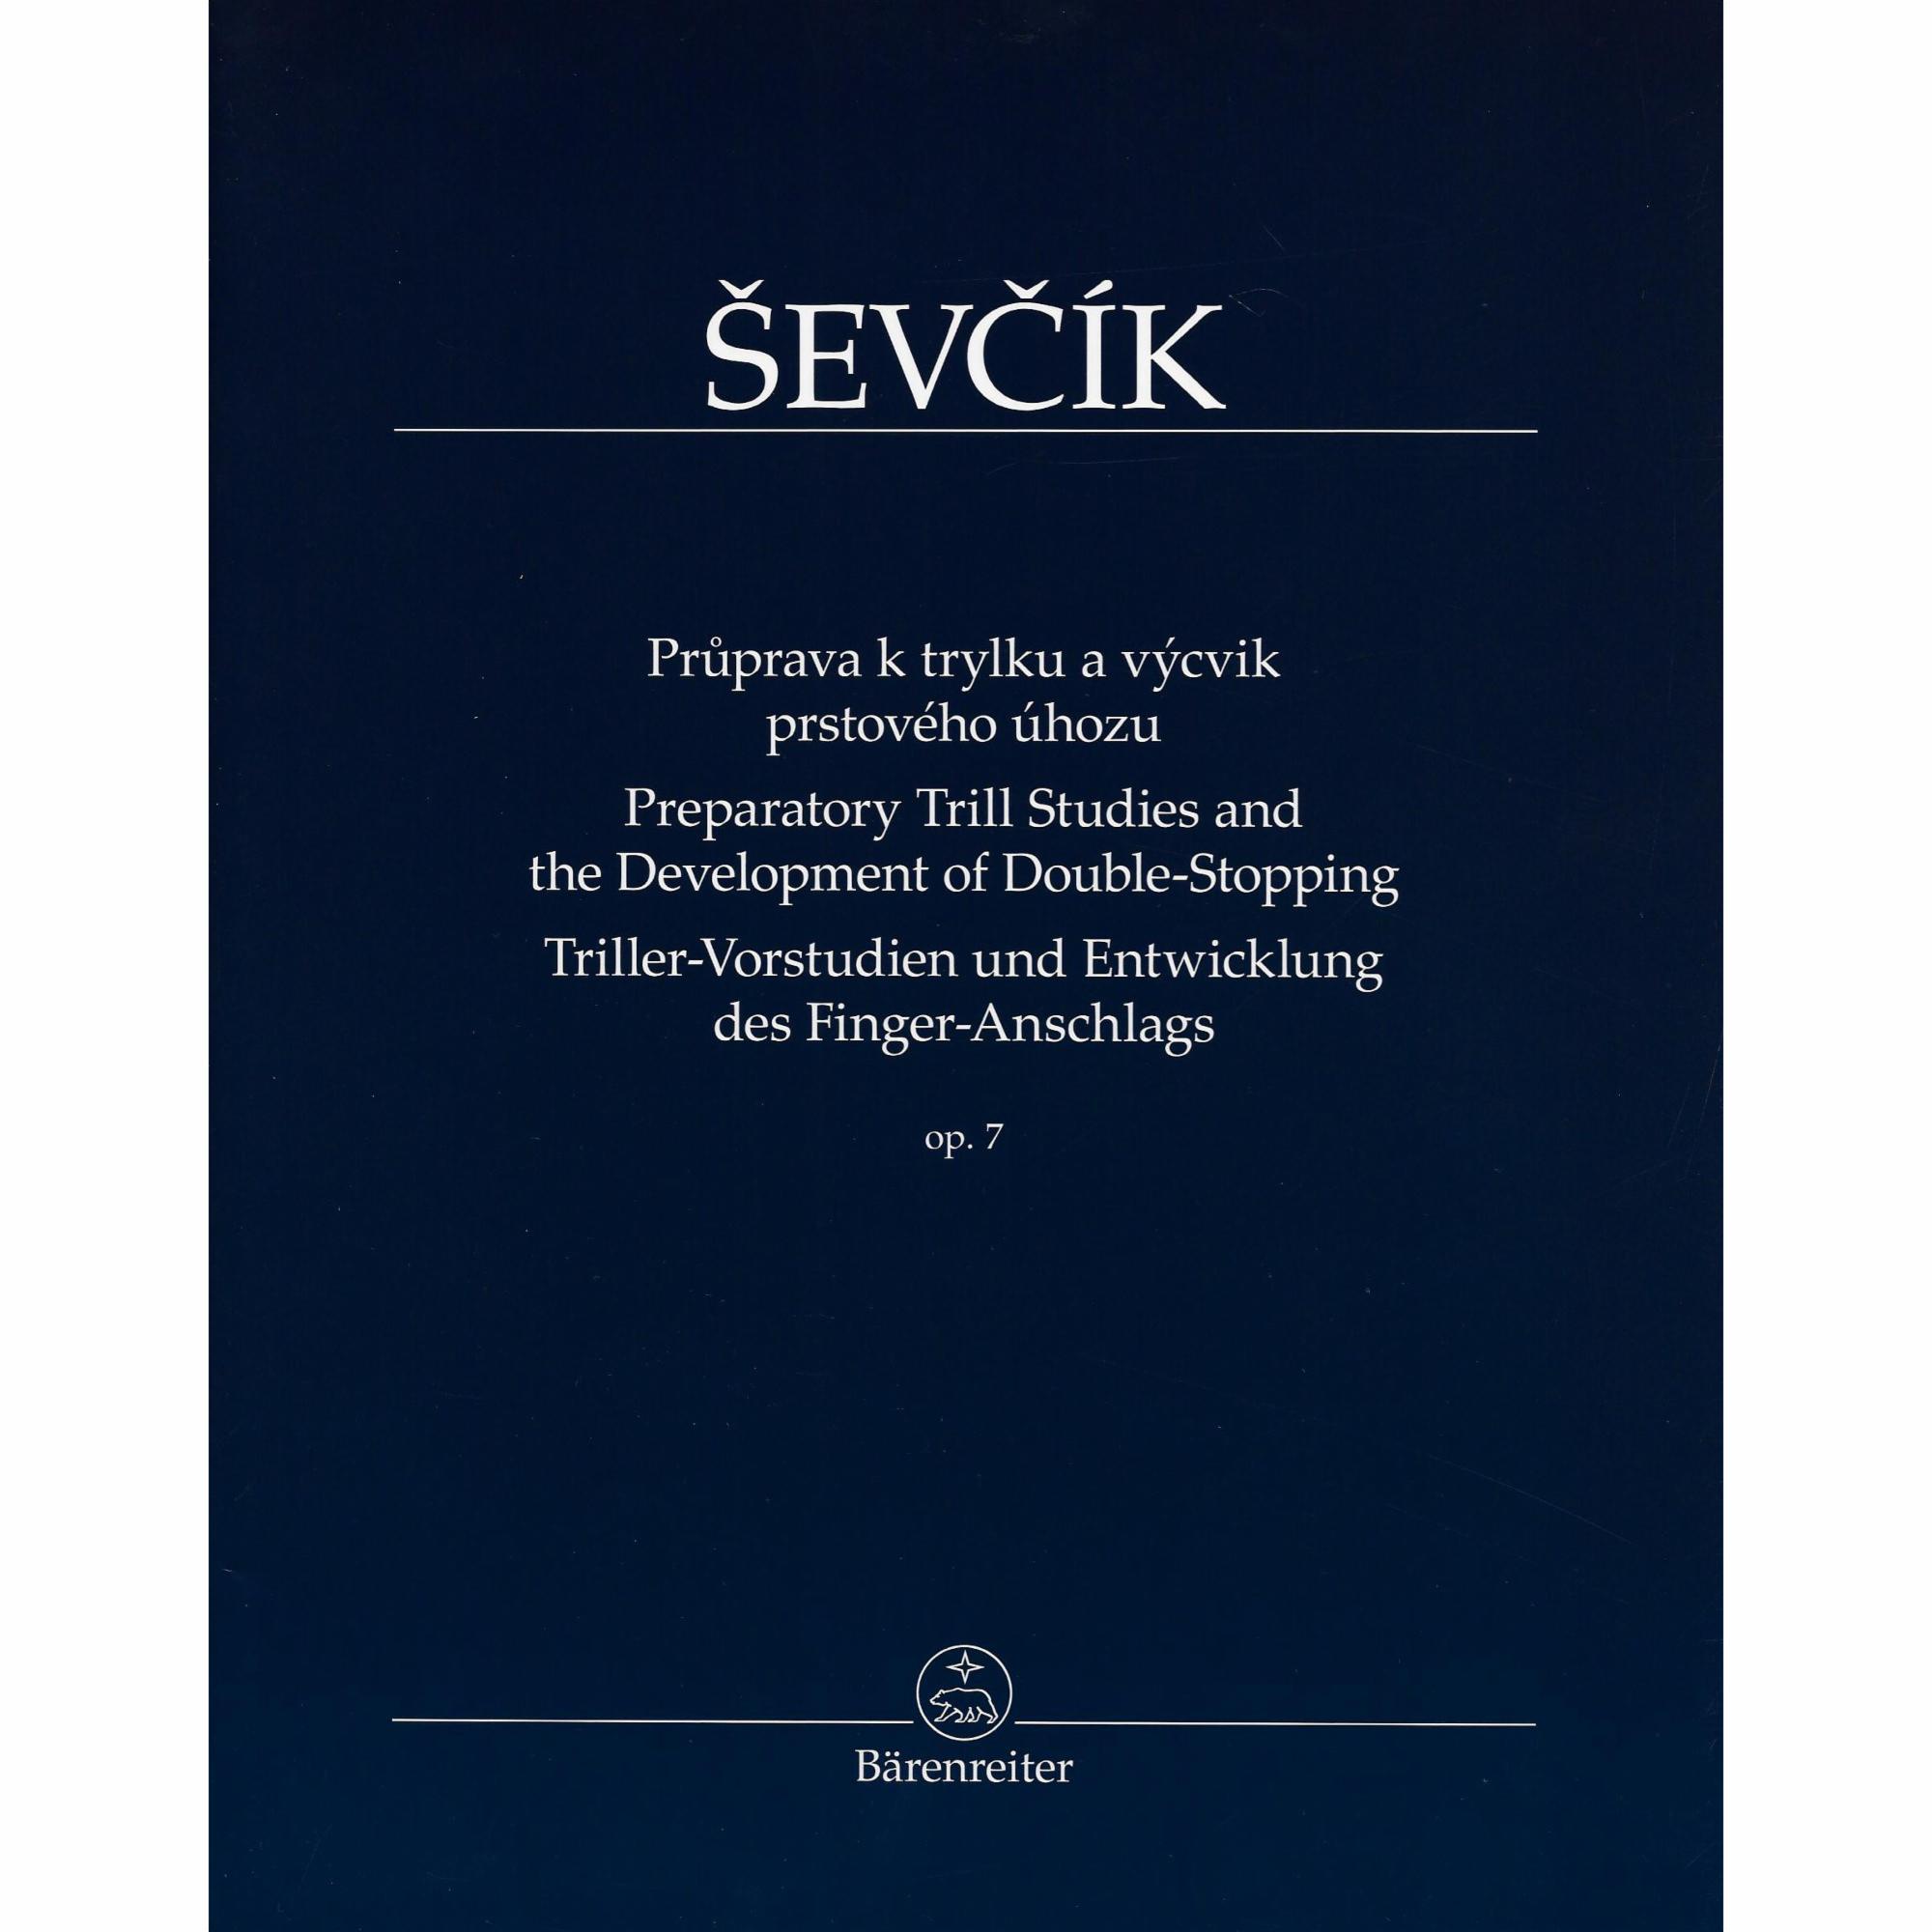 Sevcik -- Preparatory Trill Studies and Development of Double-Stopping, Op. 7 for Violin